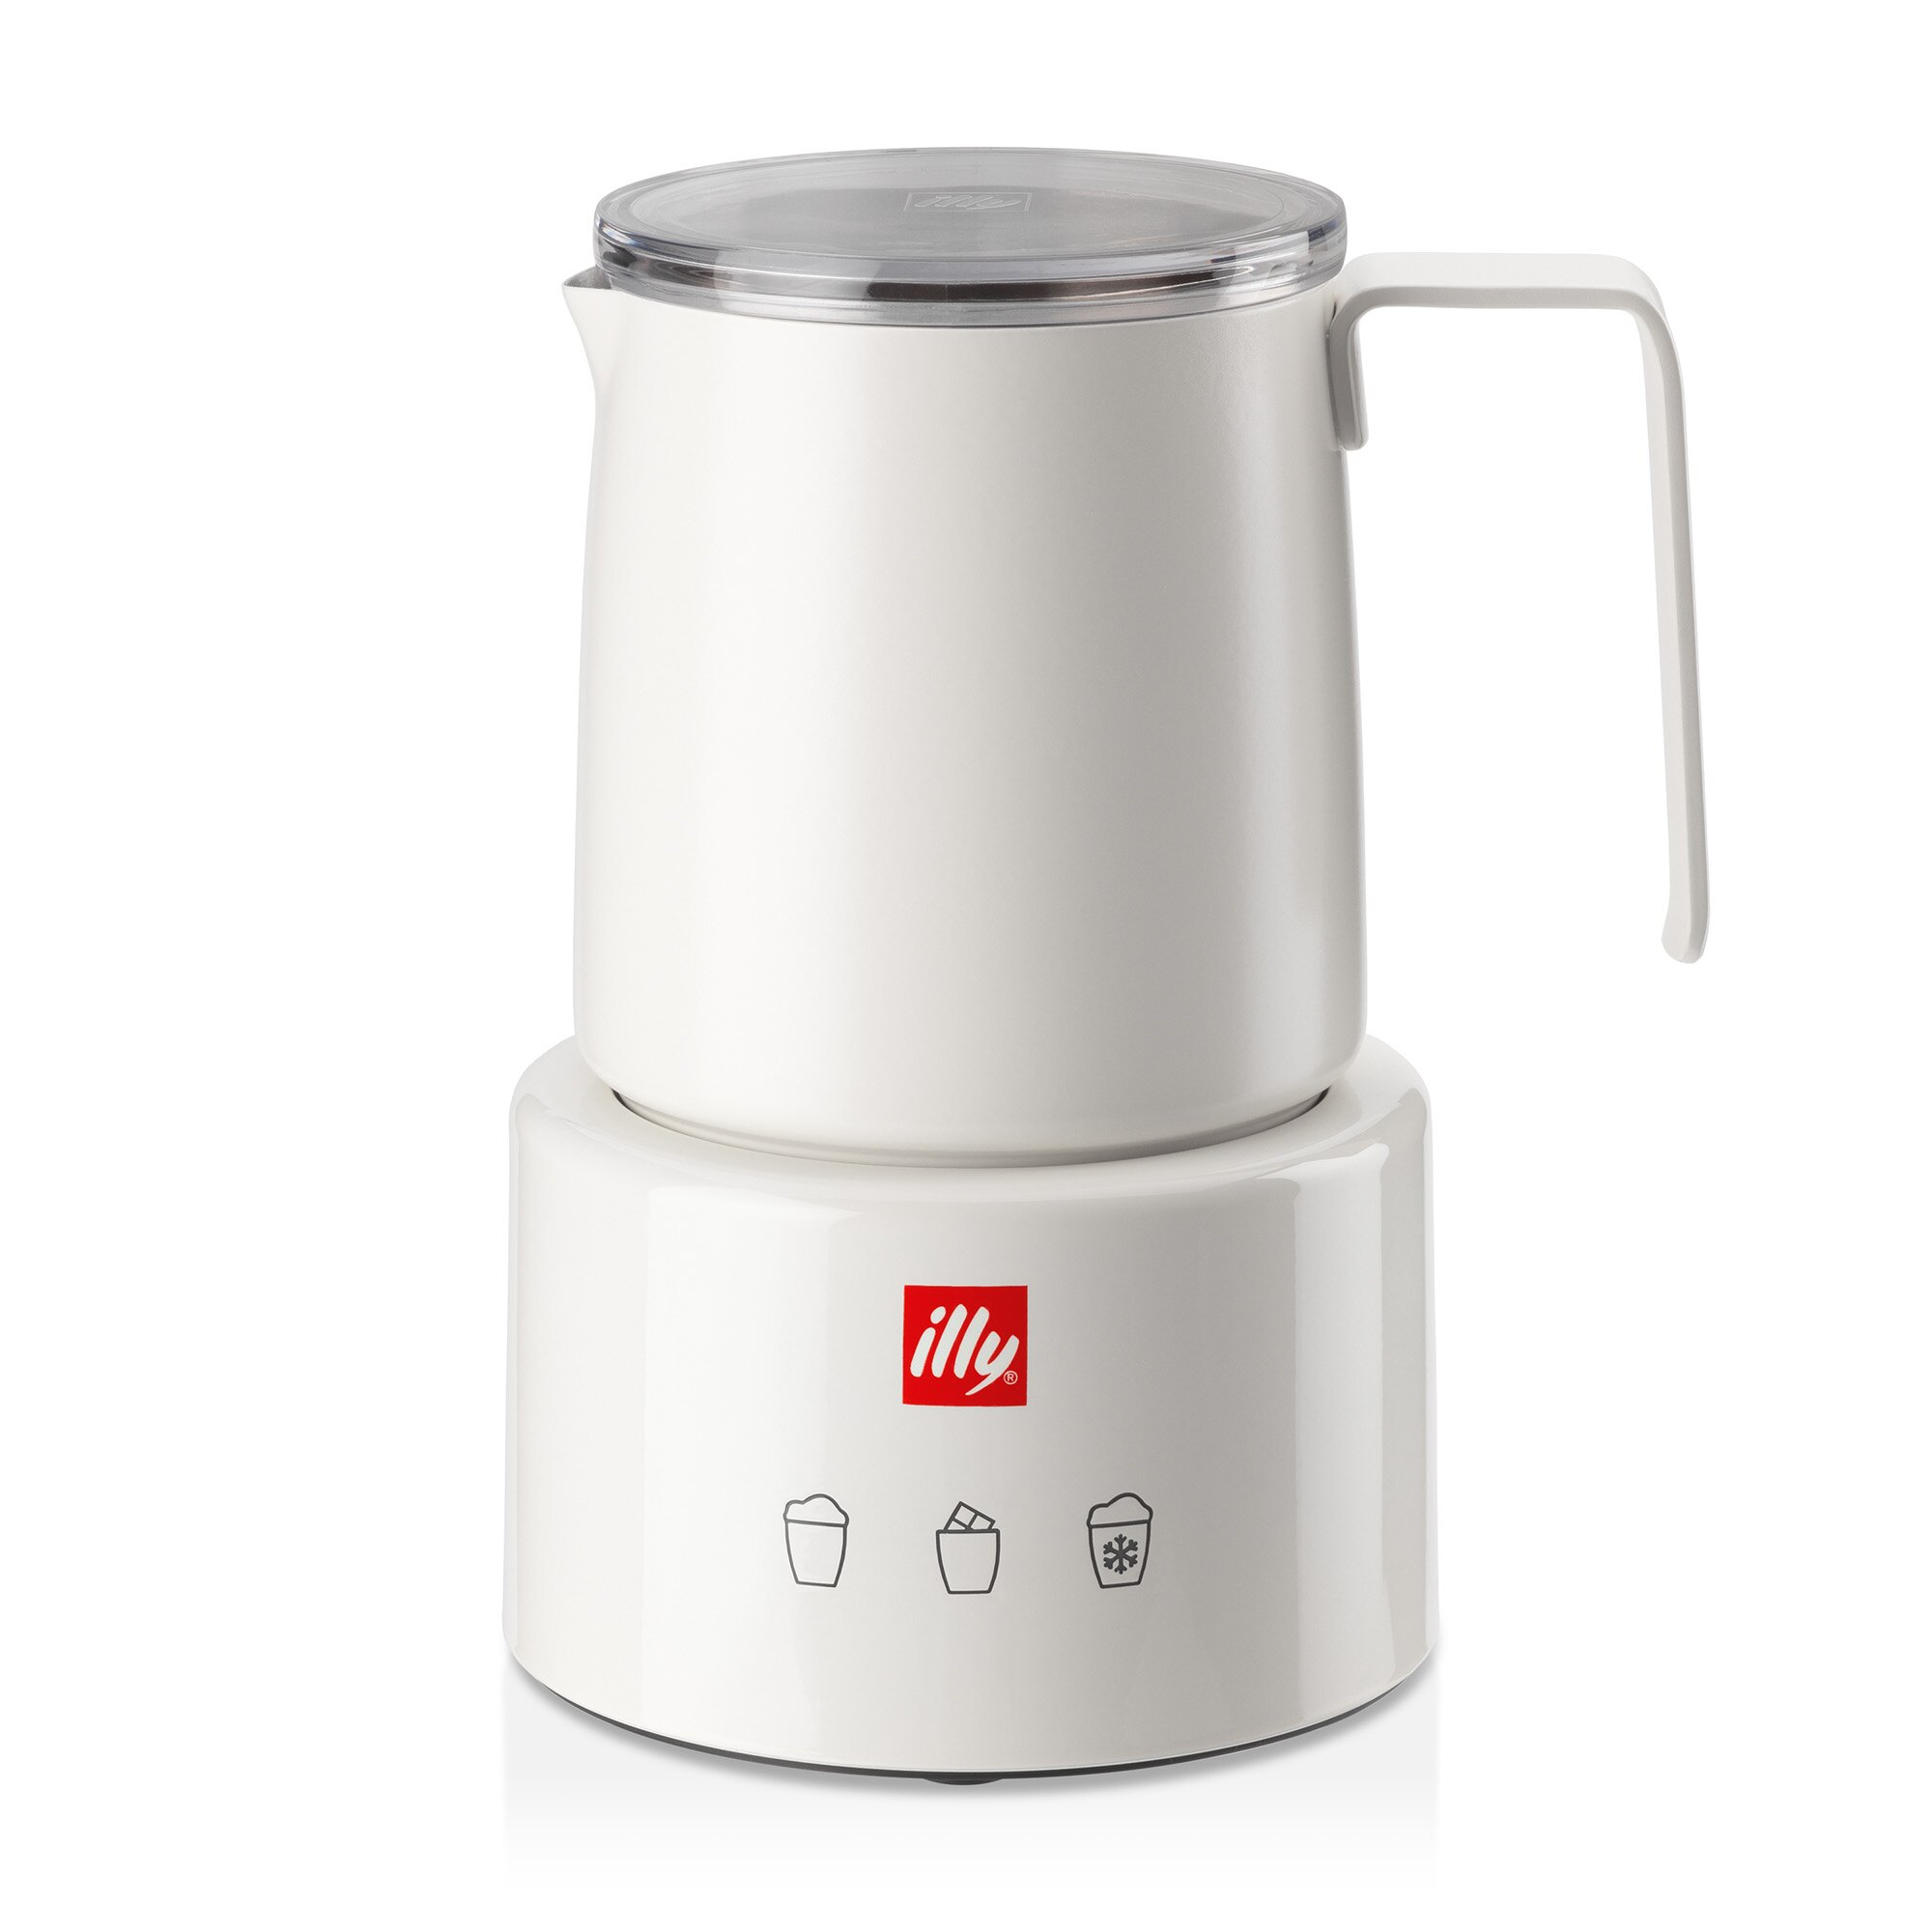 Illy 22984